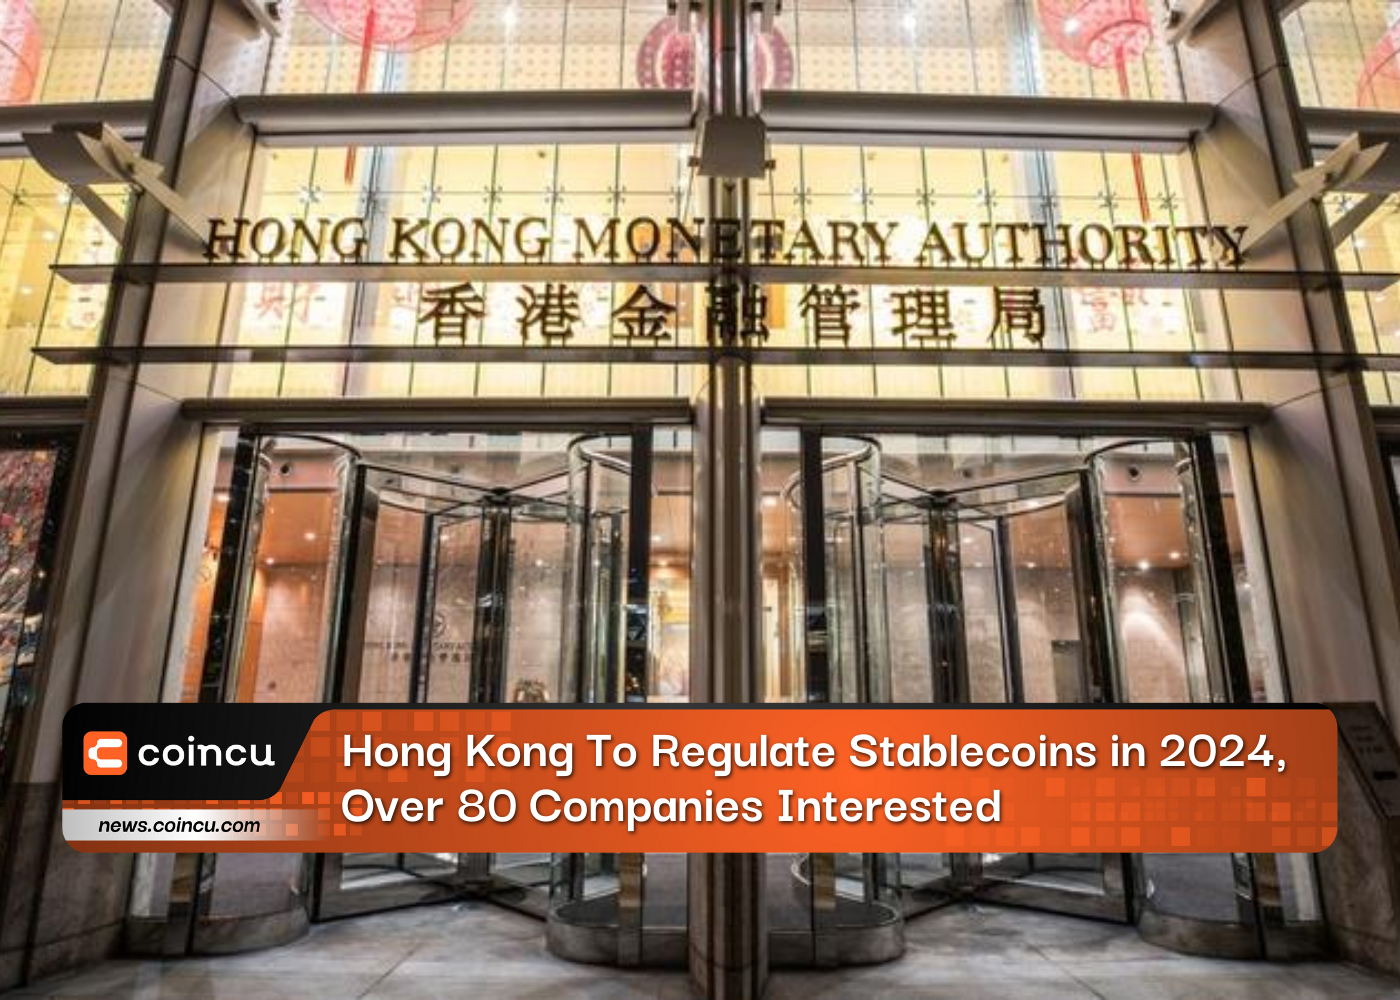 Hong Kong To Regulate Stablecoins in 2024, Over 80 Companies Interested